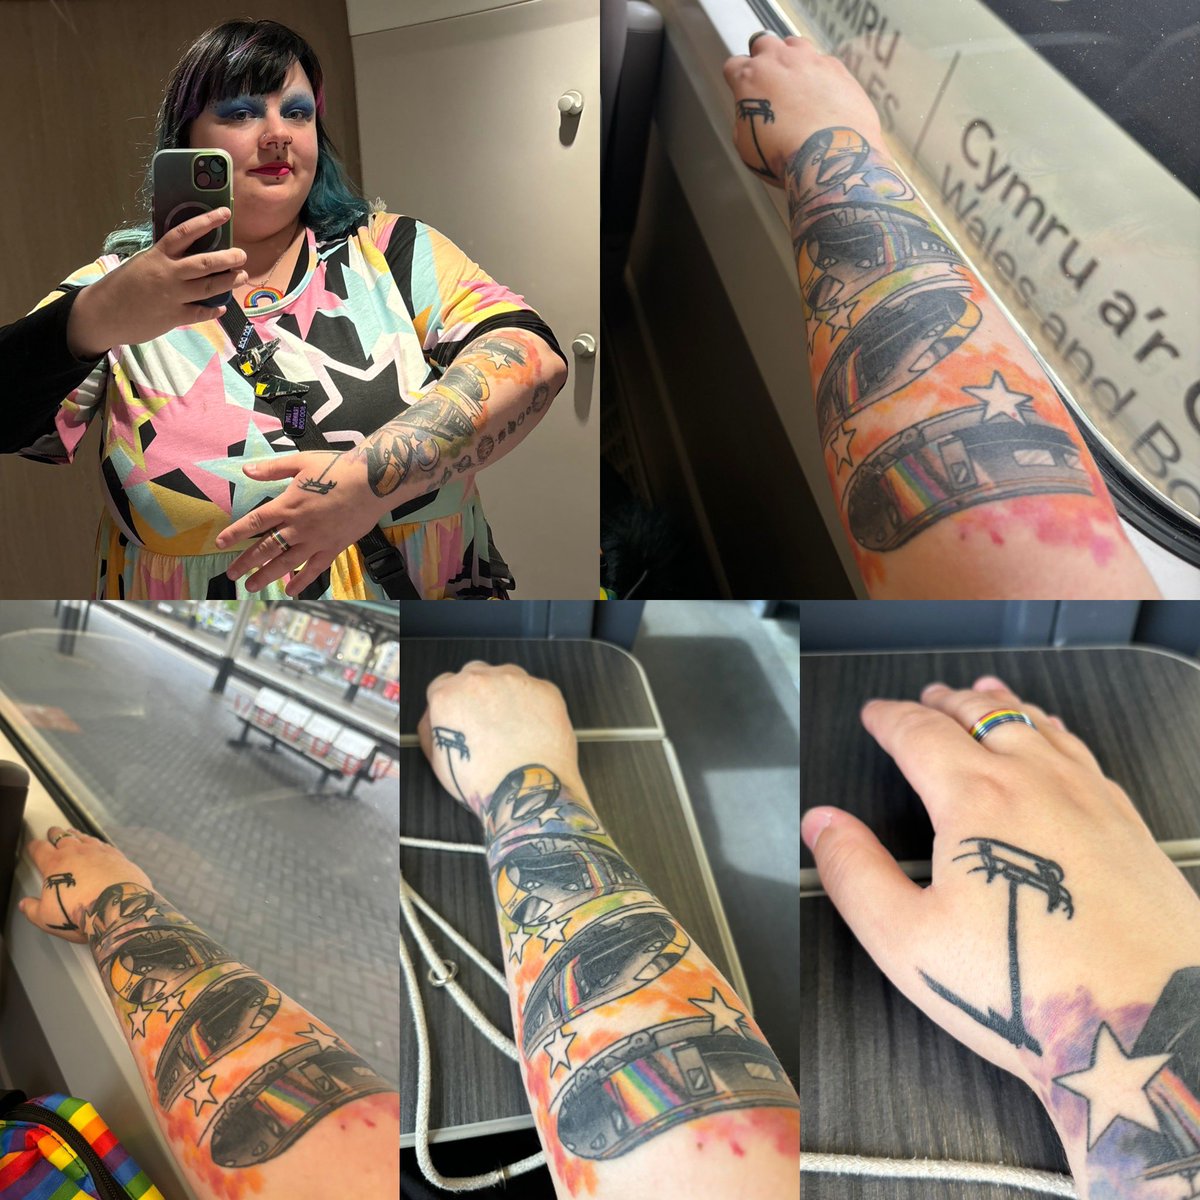 It’s been exactly a year since I met the @GWRHelp trainbow!
How she changed my life, I’ve had so much fun and everything else since then it’s been amazing 
Thank you for trainbow

Had to put the tattoo in this post and a then and now comparison 

It’s gone by so fast 
#trainbow